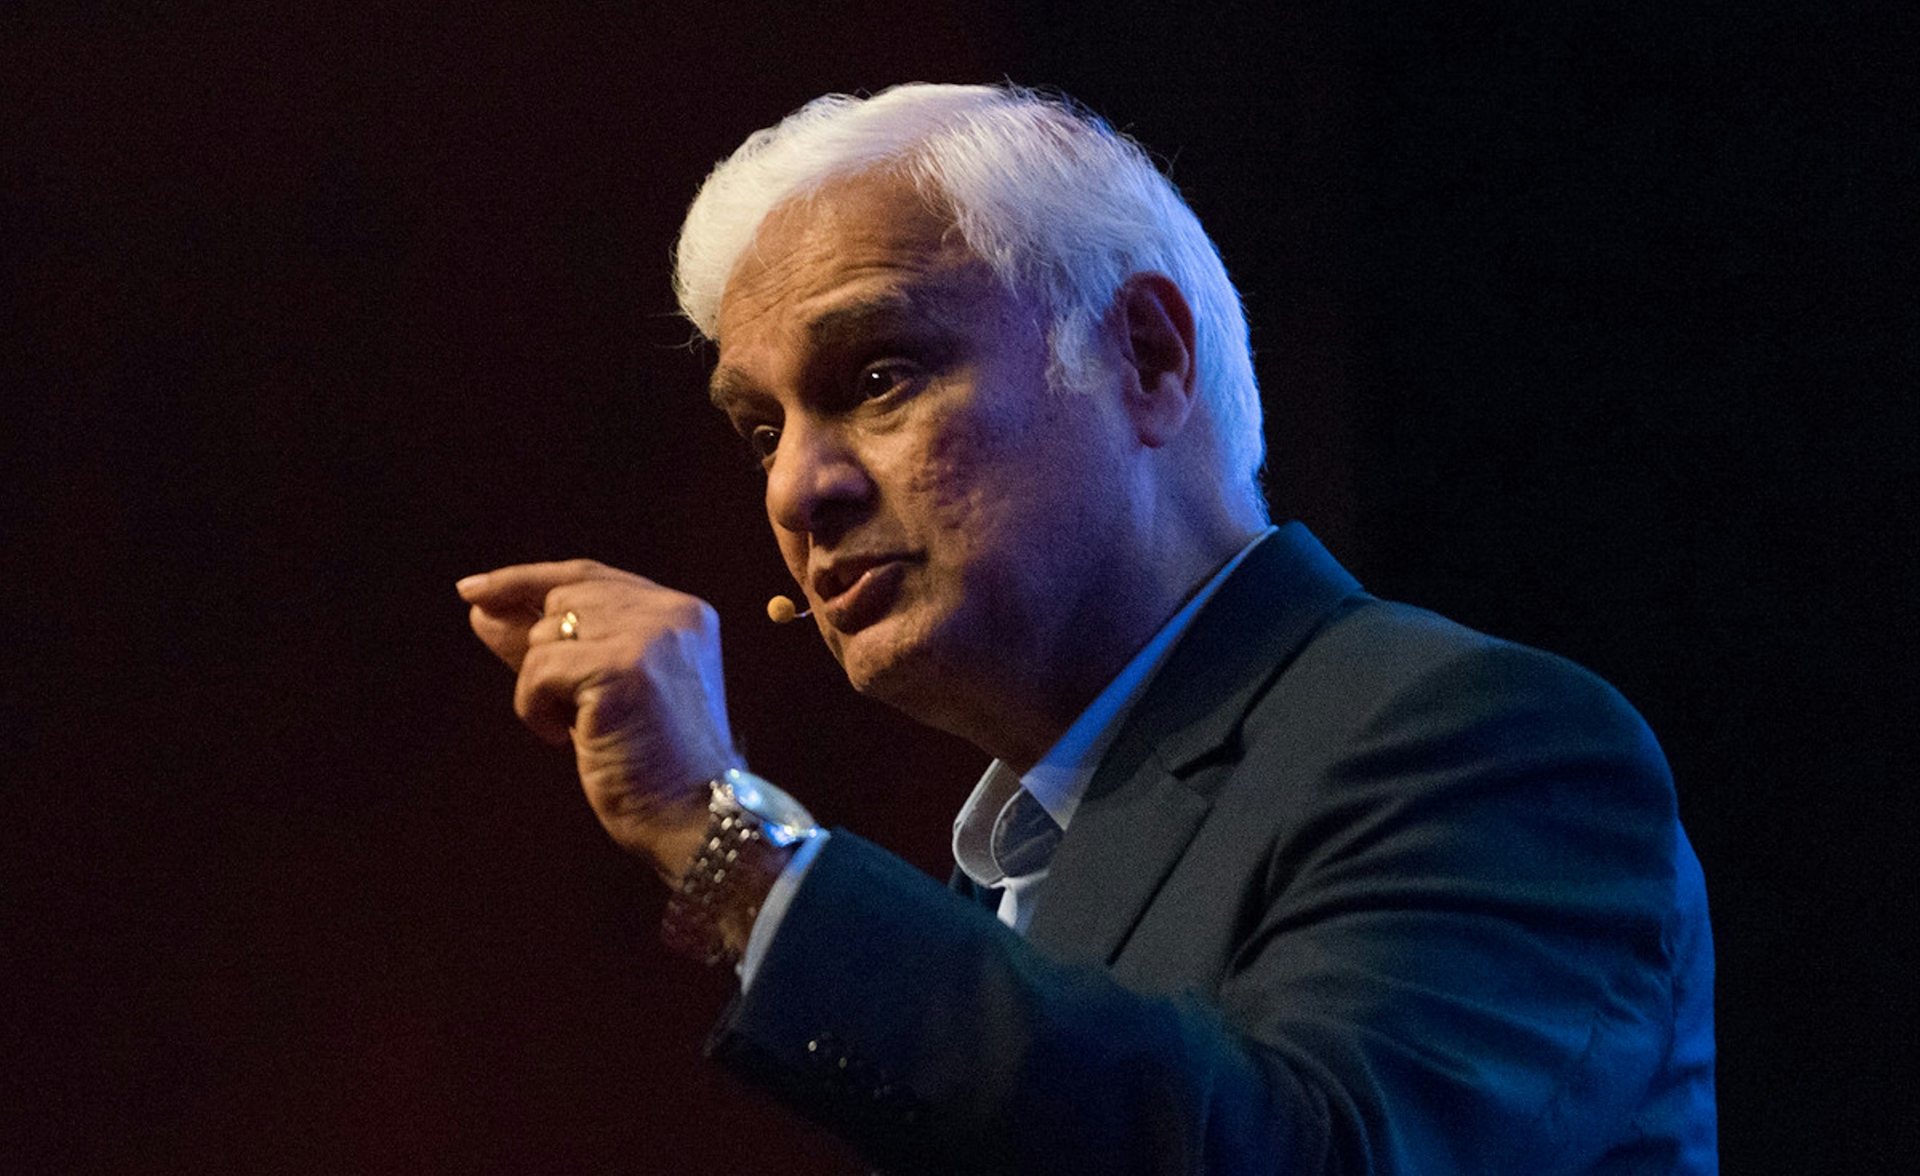 Learning From Dr. Ravi Zacharias’ Apologetics And Life Experience